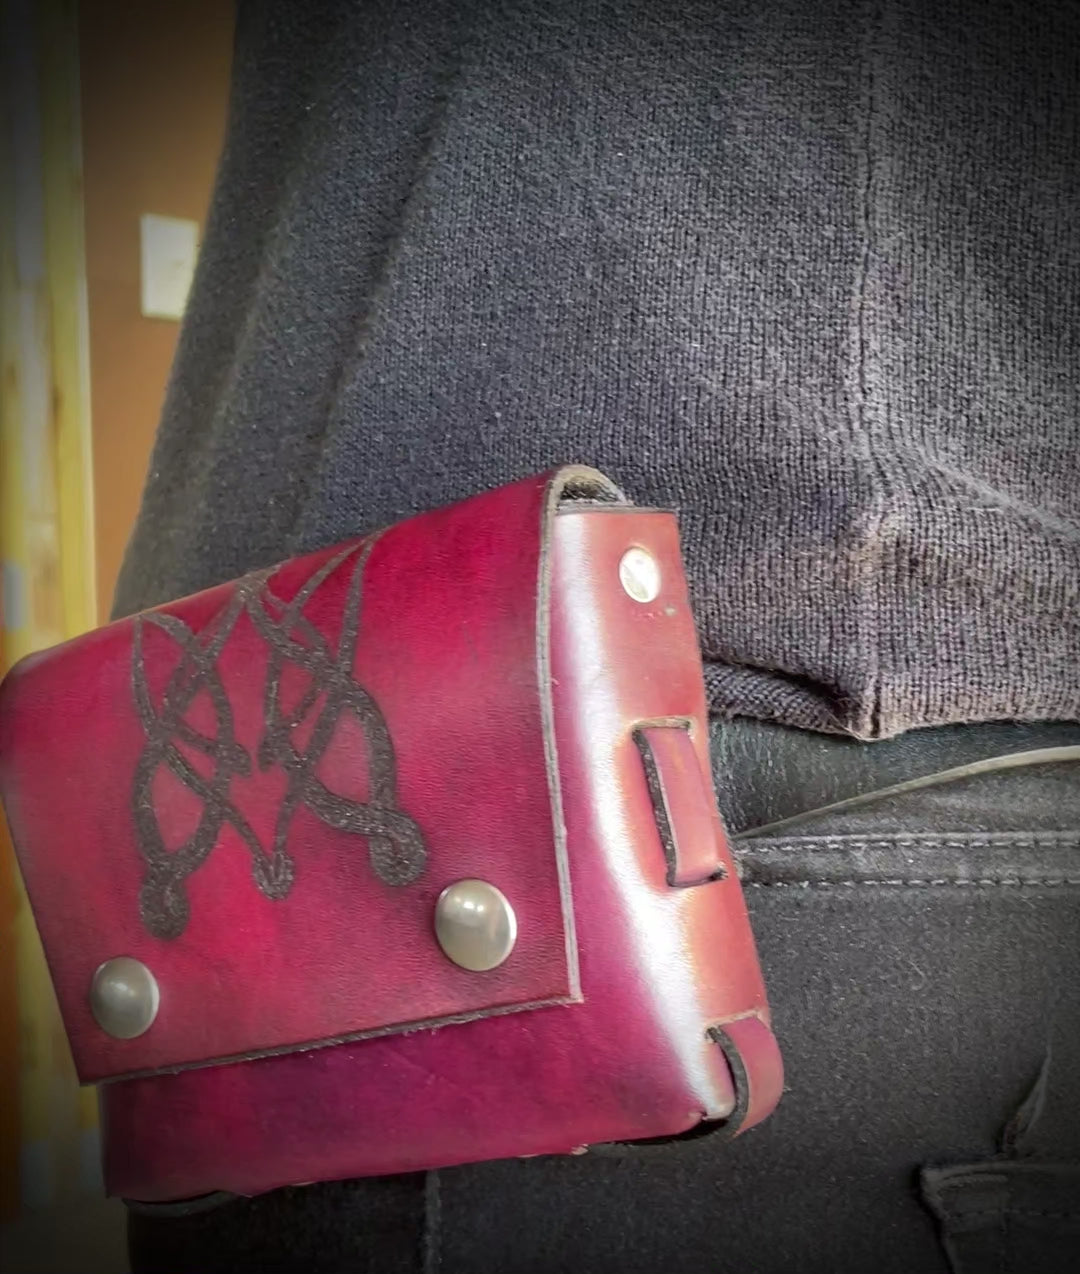 Check out this small pouch attached to my belt!